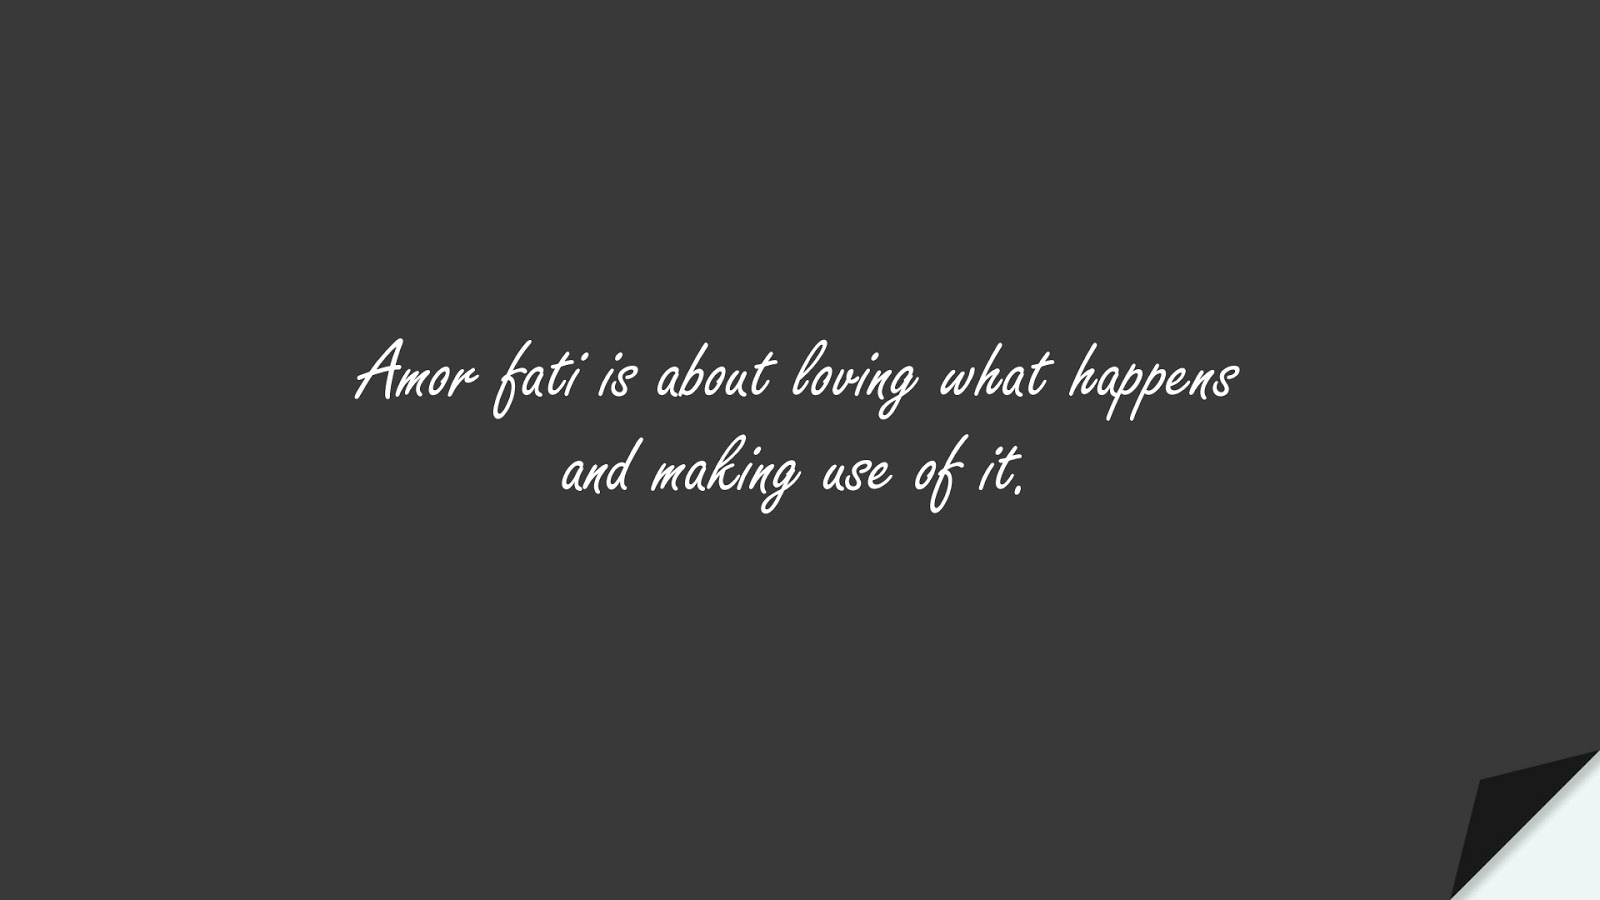 Amor fati is about loving what happens and making use of it.FALSE